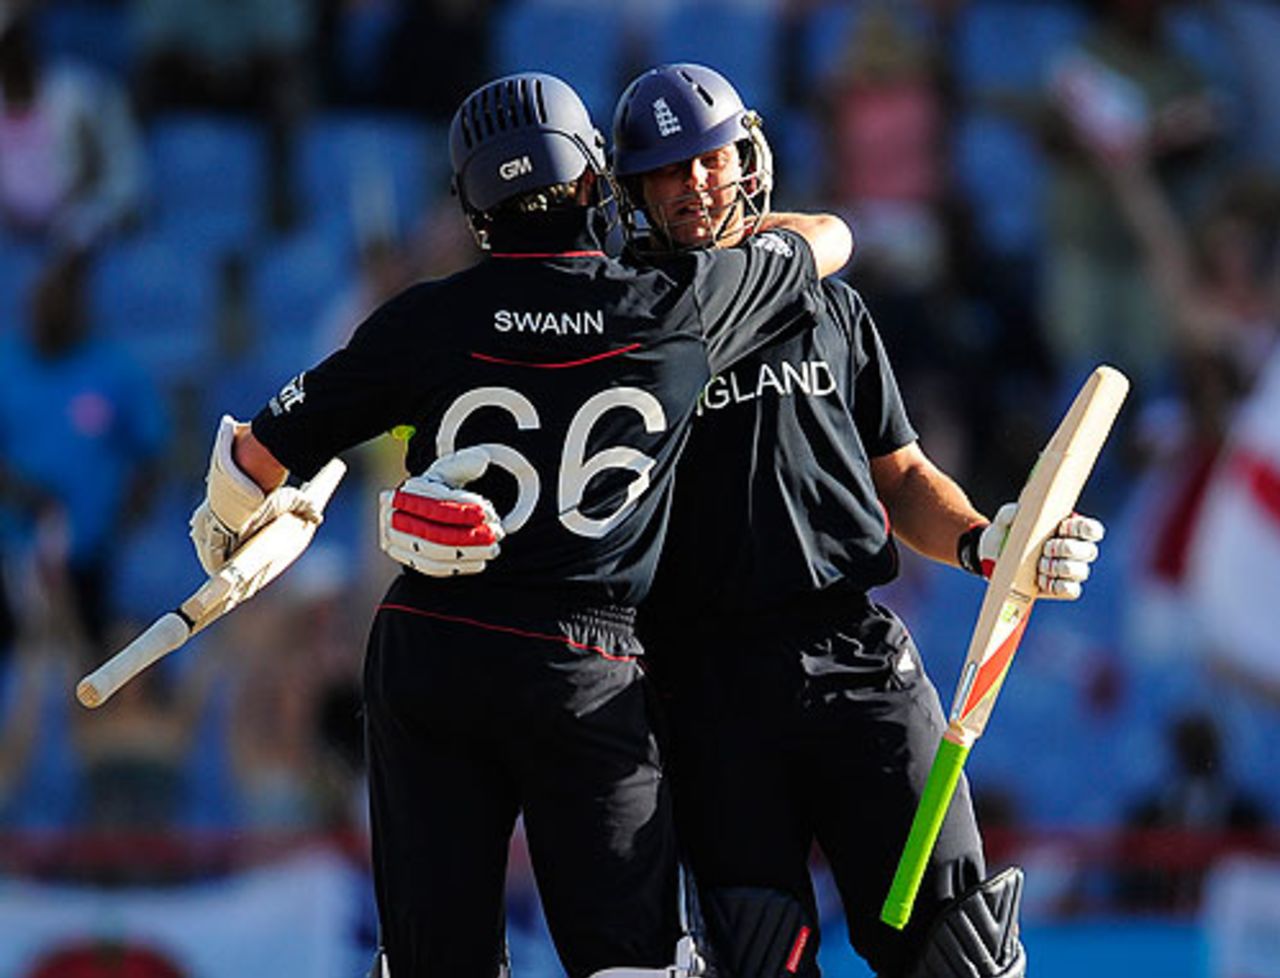 Tim Bresnan and Graeme Swann embrace as England complete a comfortable three-wicket victory, England v New Zealand, Super Eights, ICC World Twenty20, St Lucia, May 10, 2010